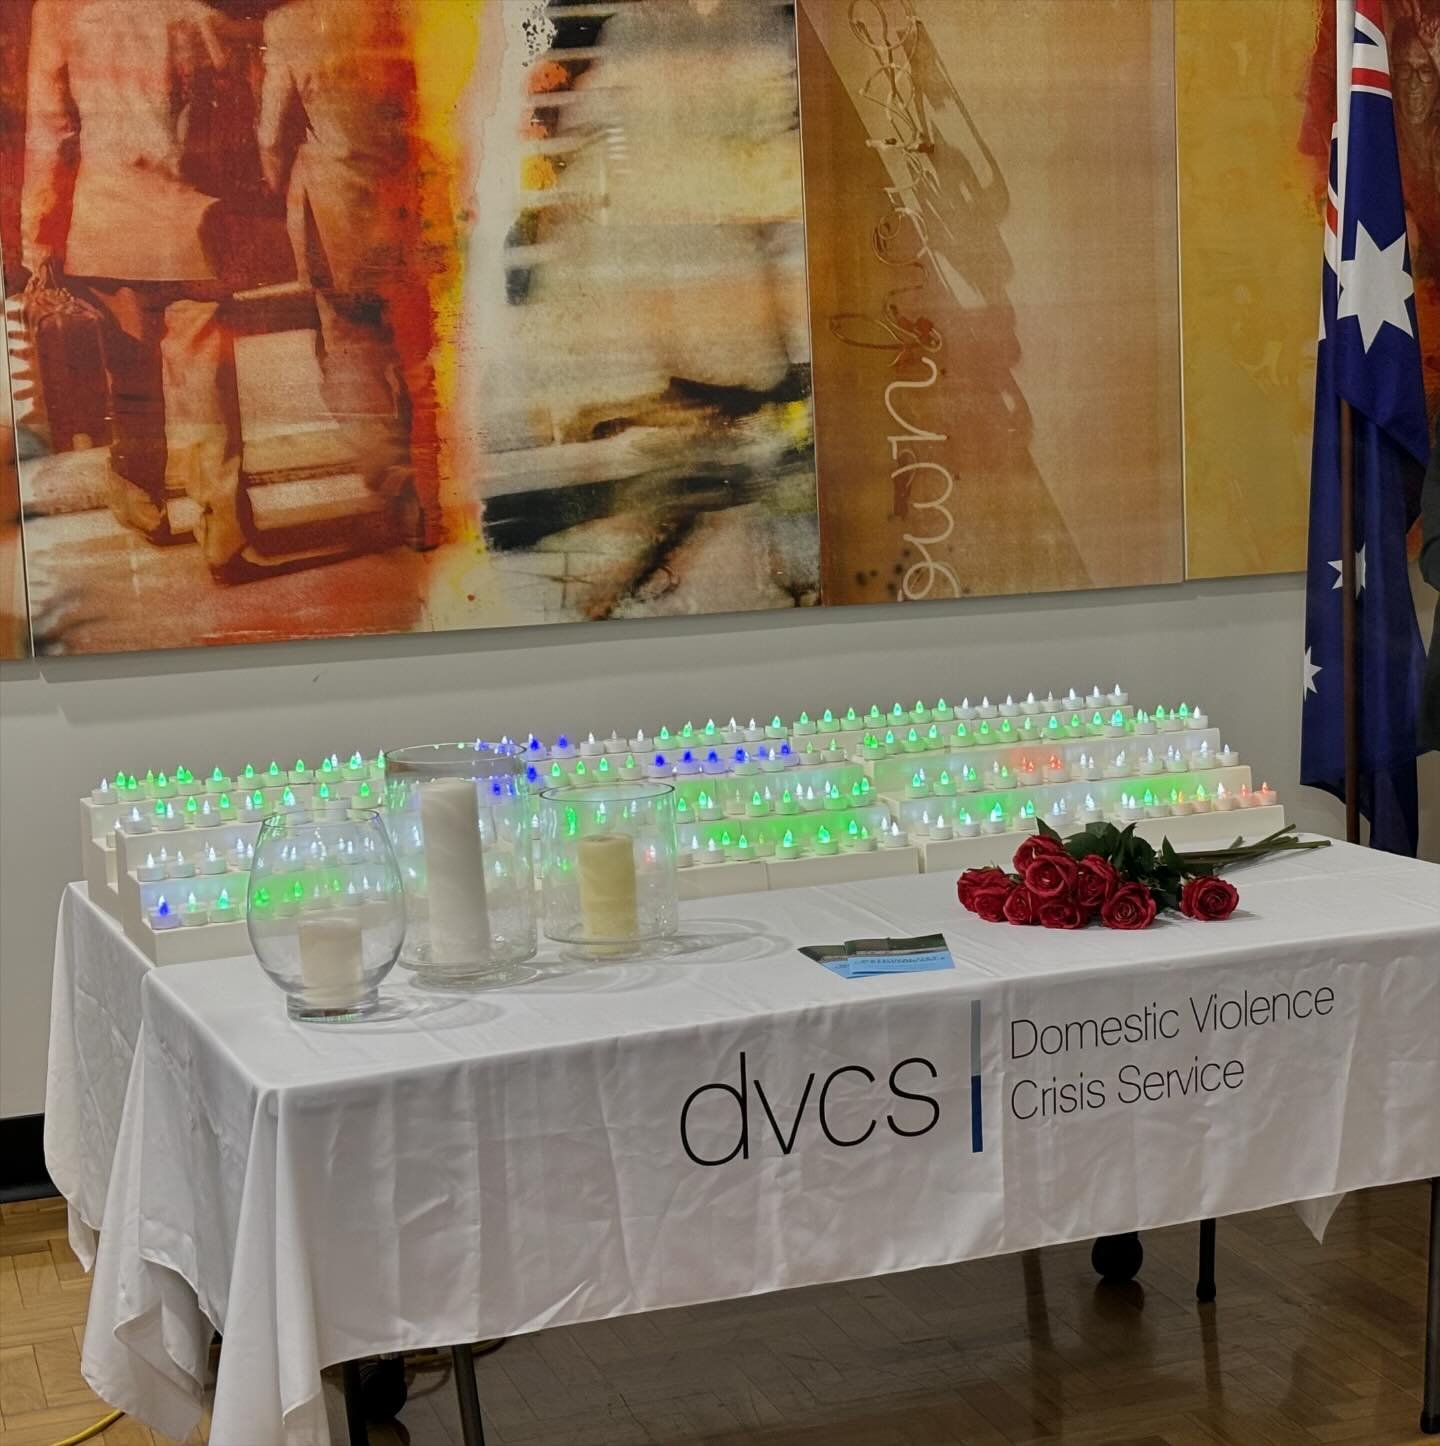 Very moving ceremony yesterday evening at the @actassembly to acknowledge National Day of Remembrance and to commemorate lives lost to domestic violence.
@dvcsact